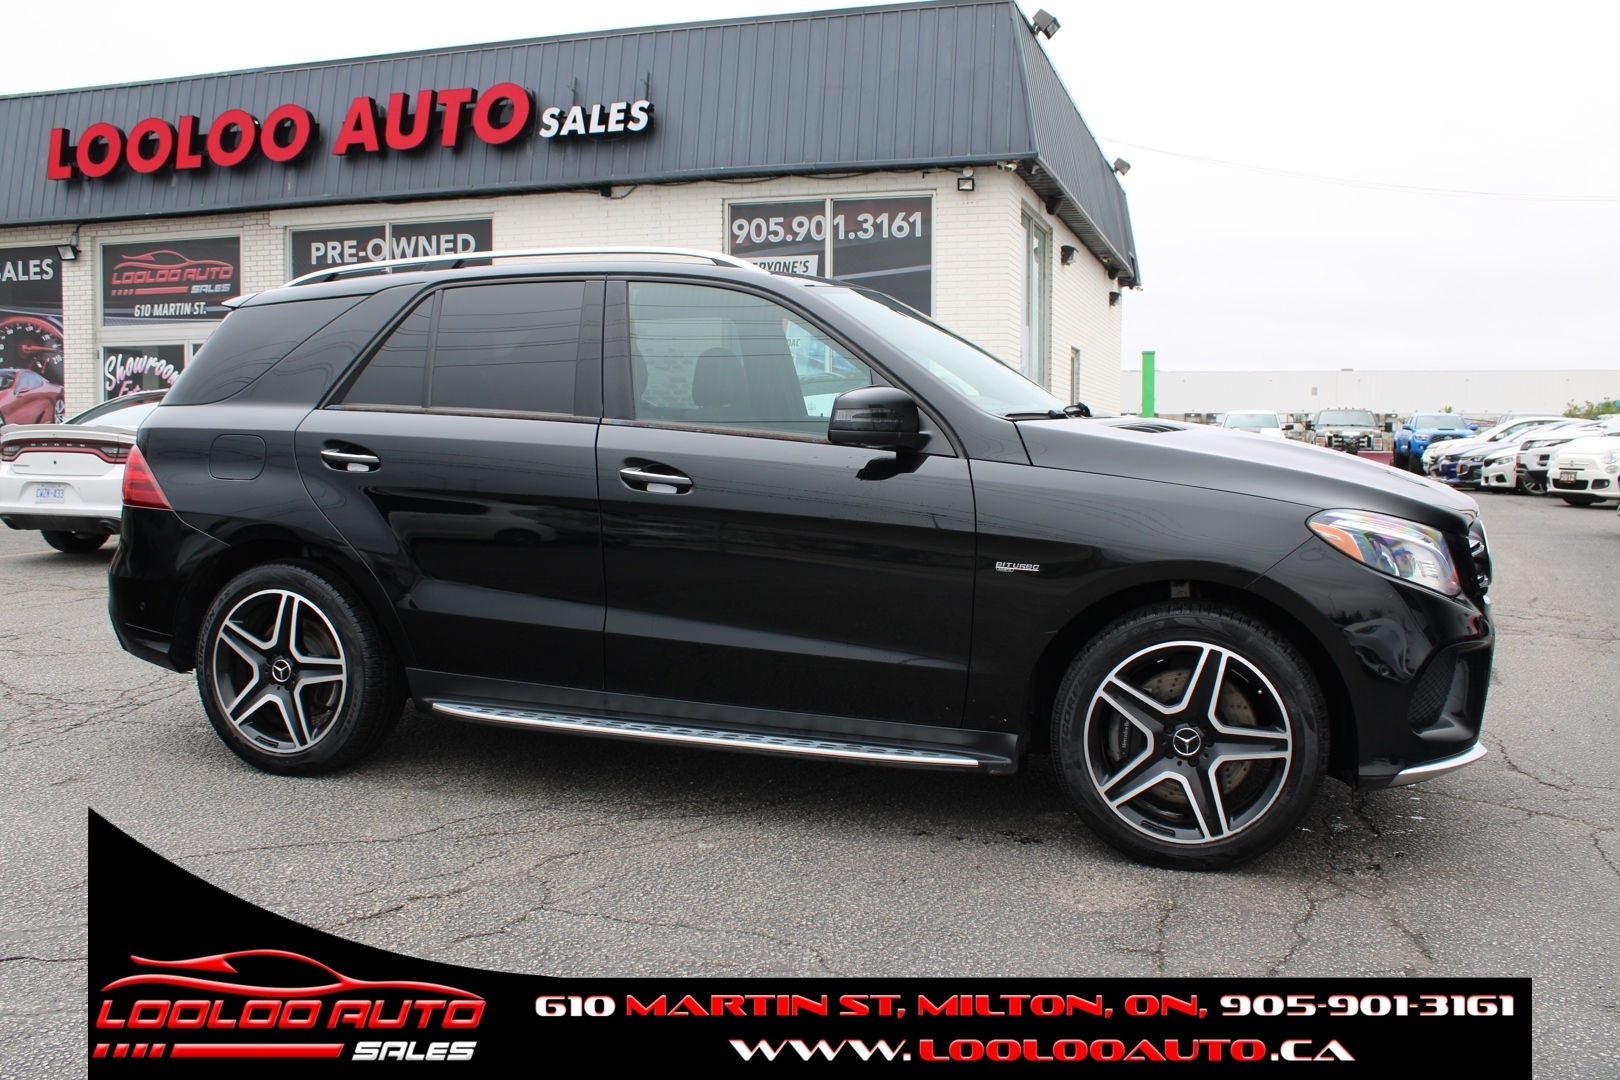 2018 Mercedes-Benz GLE-Class AMG GLE 43 4MATIC Navigation $125/Weekly Certified